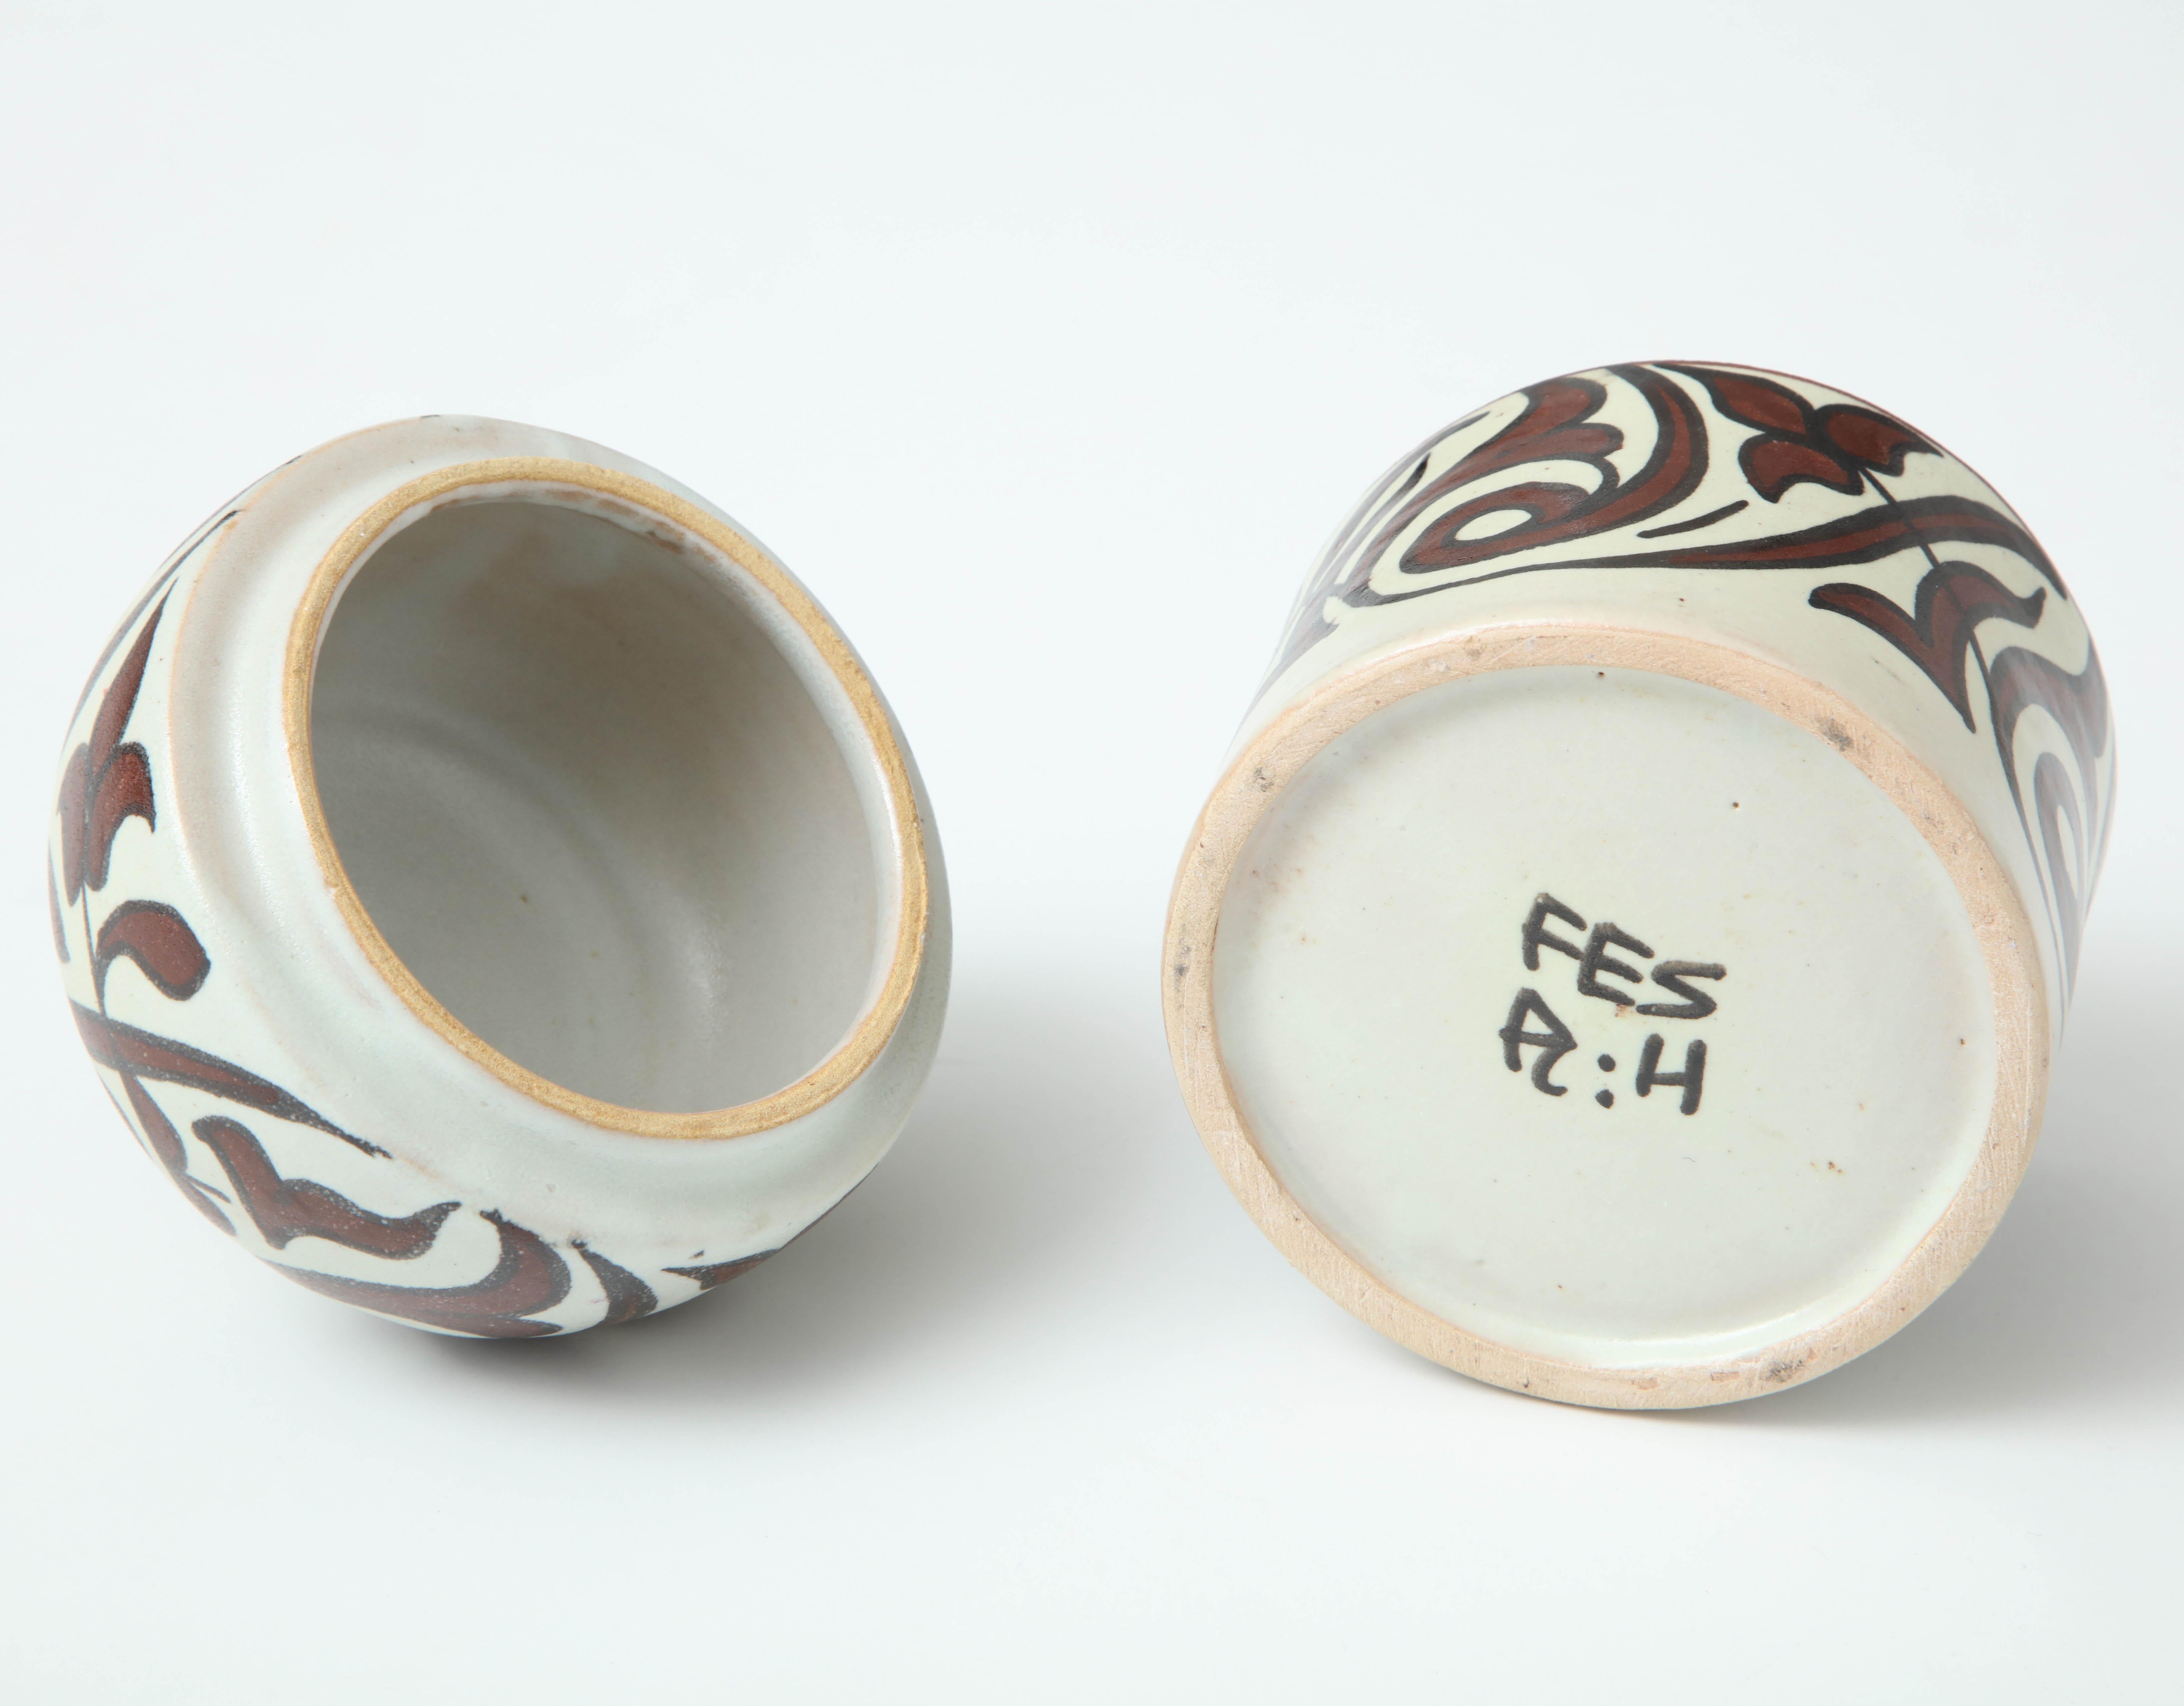 Pottery from Morocco, Cream & Burgundy Color, Handcrafted, Contemporary Ceramic In New Condition For Sale In New York, NY